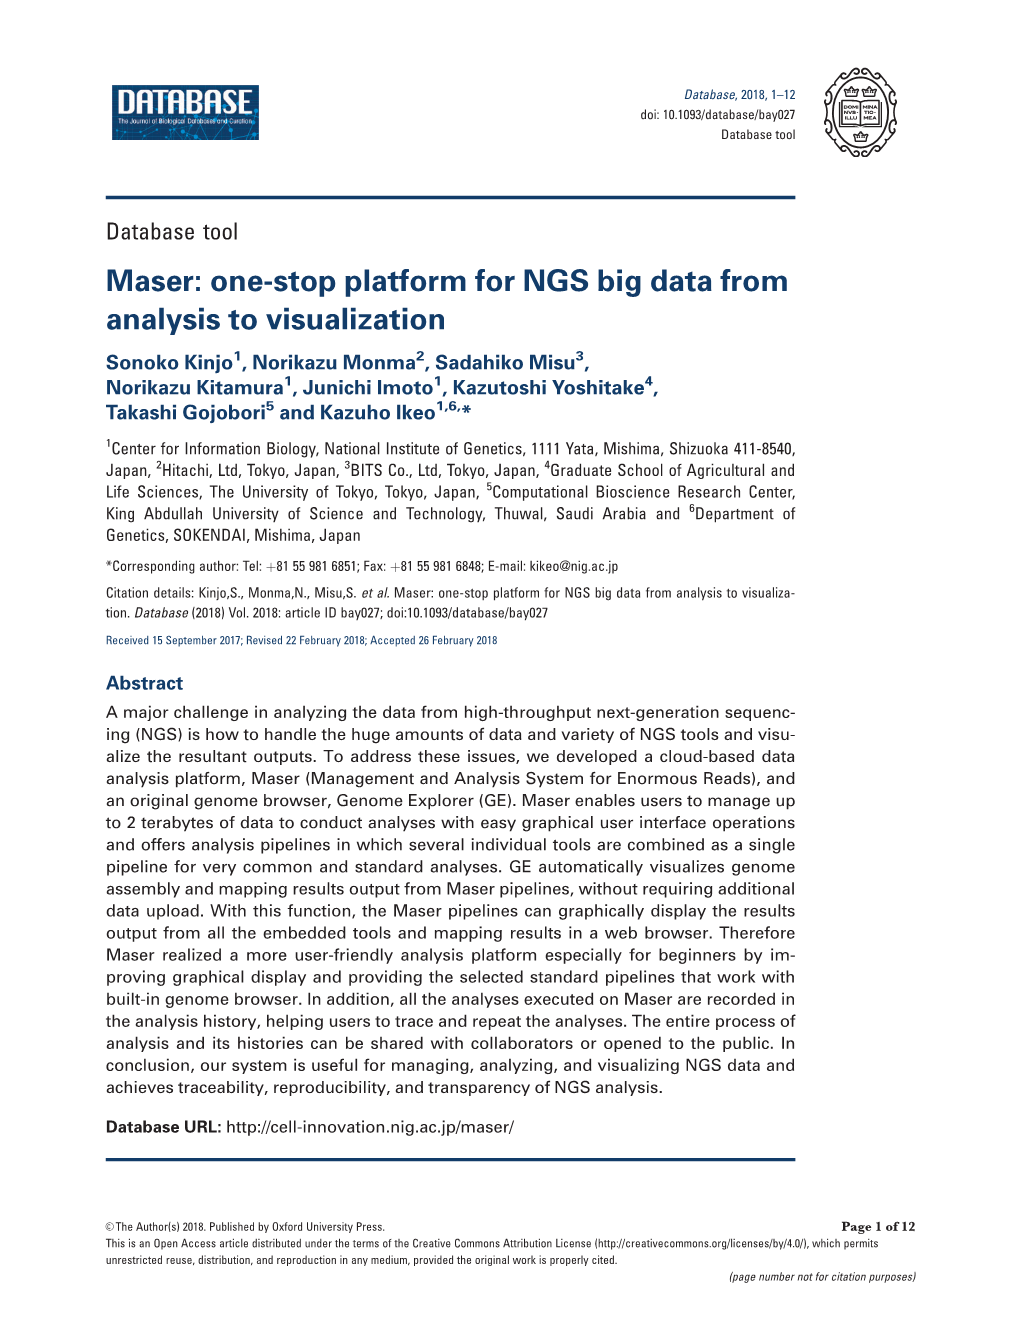 Maser: One-Stop Platform for NGS Big Data from Analysis to Visualization